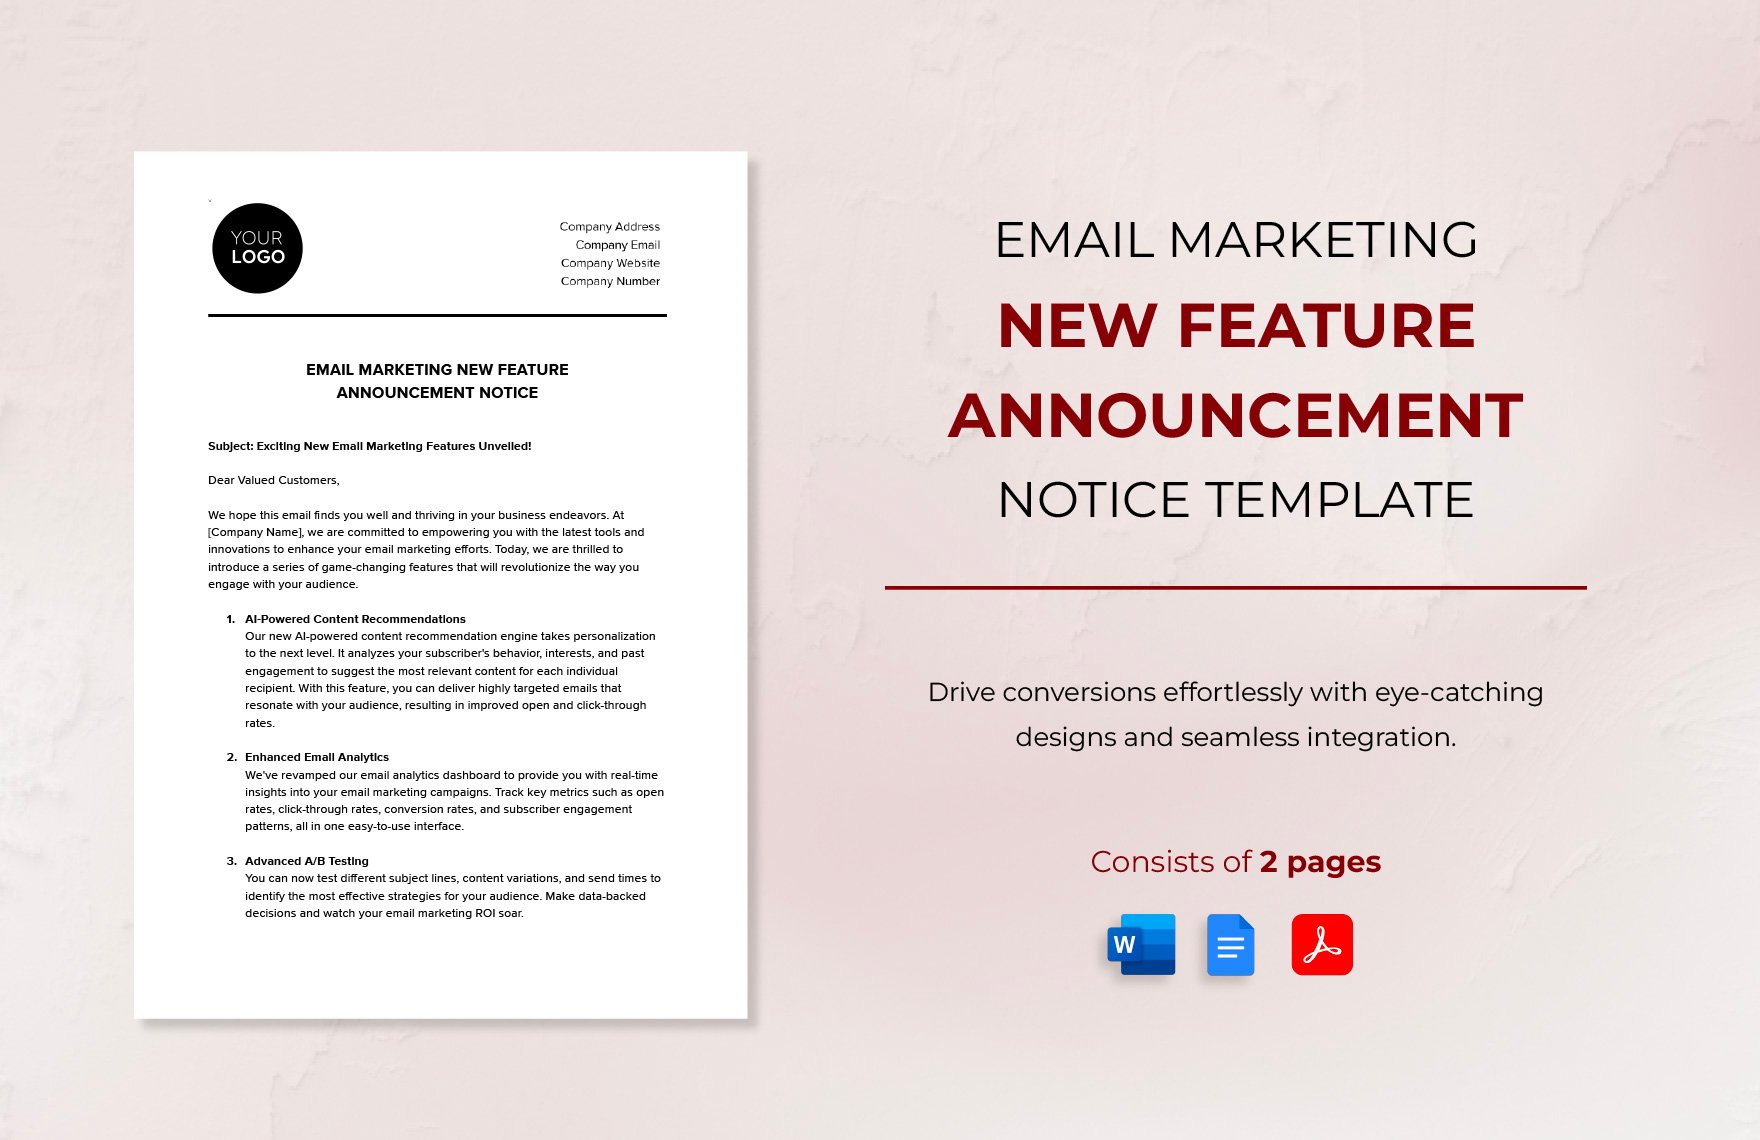 Email Marketing New Feature Announcement Notice Template